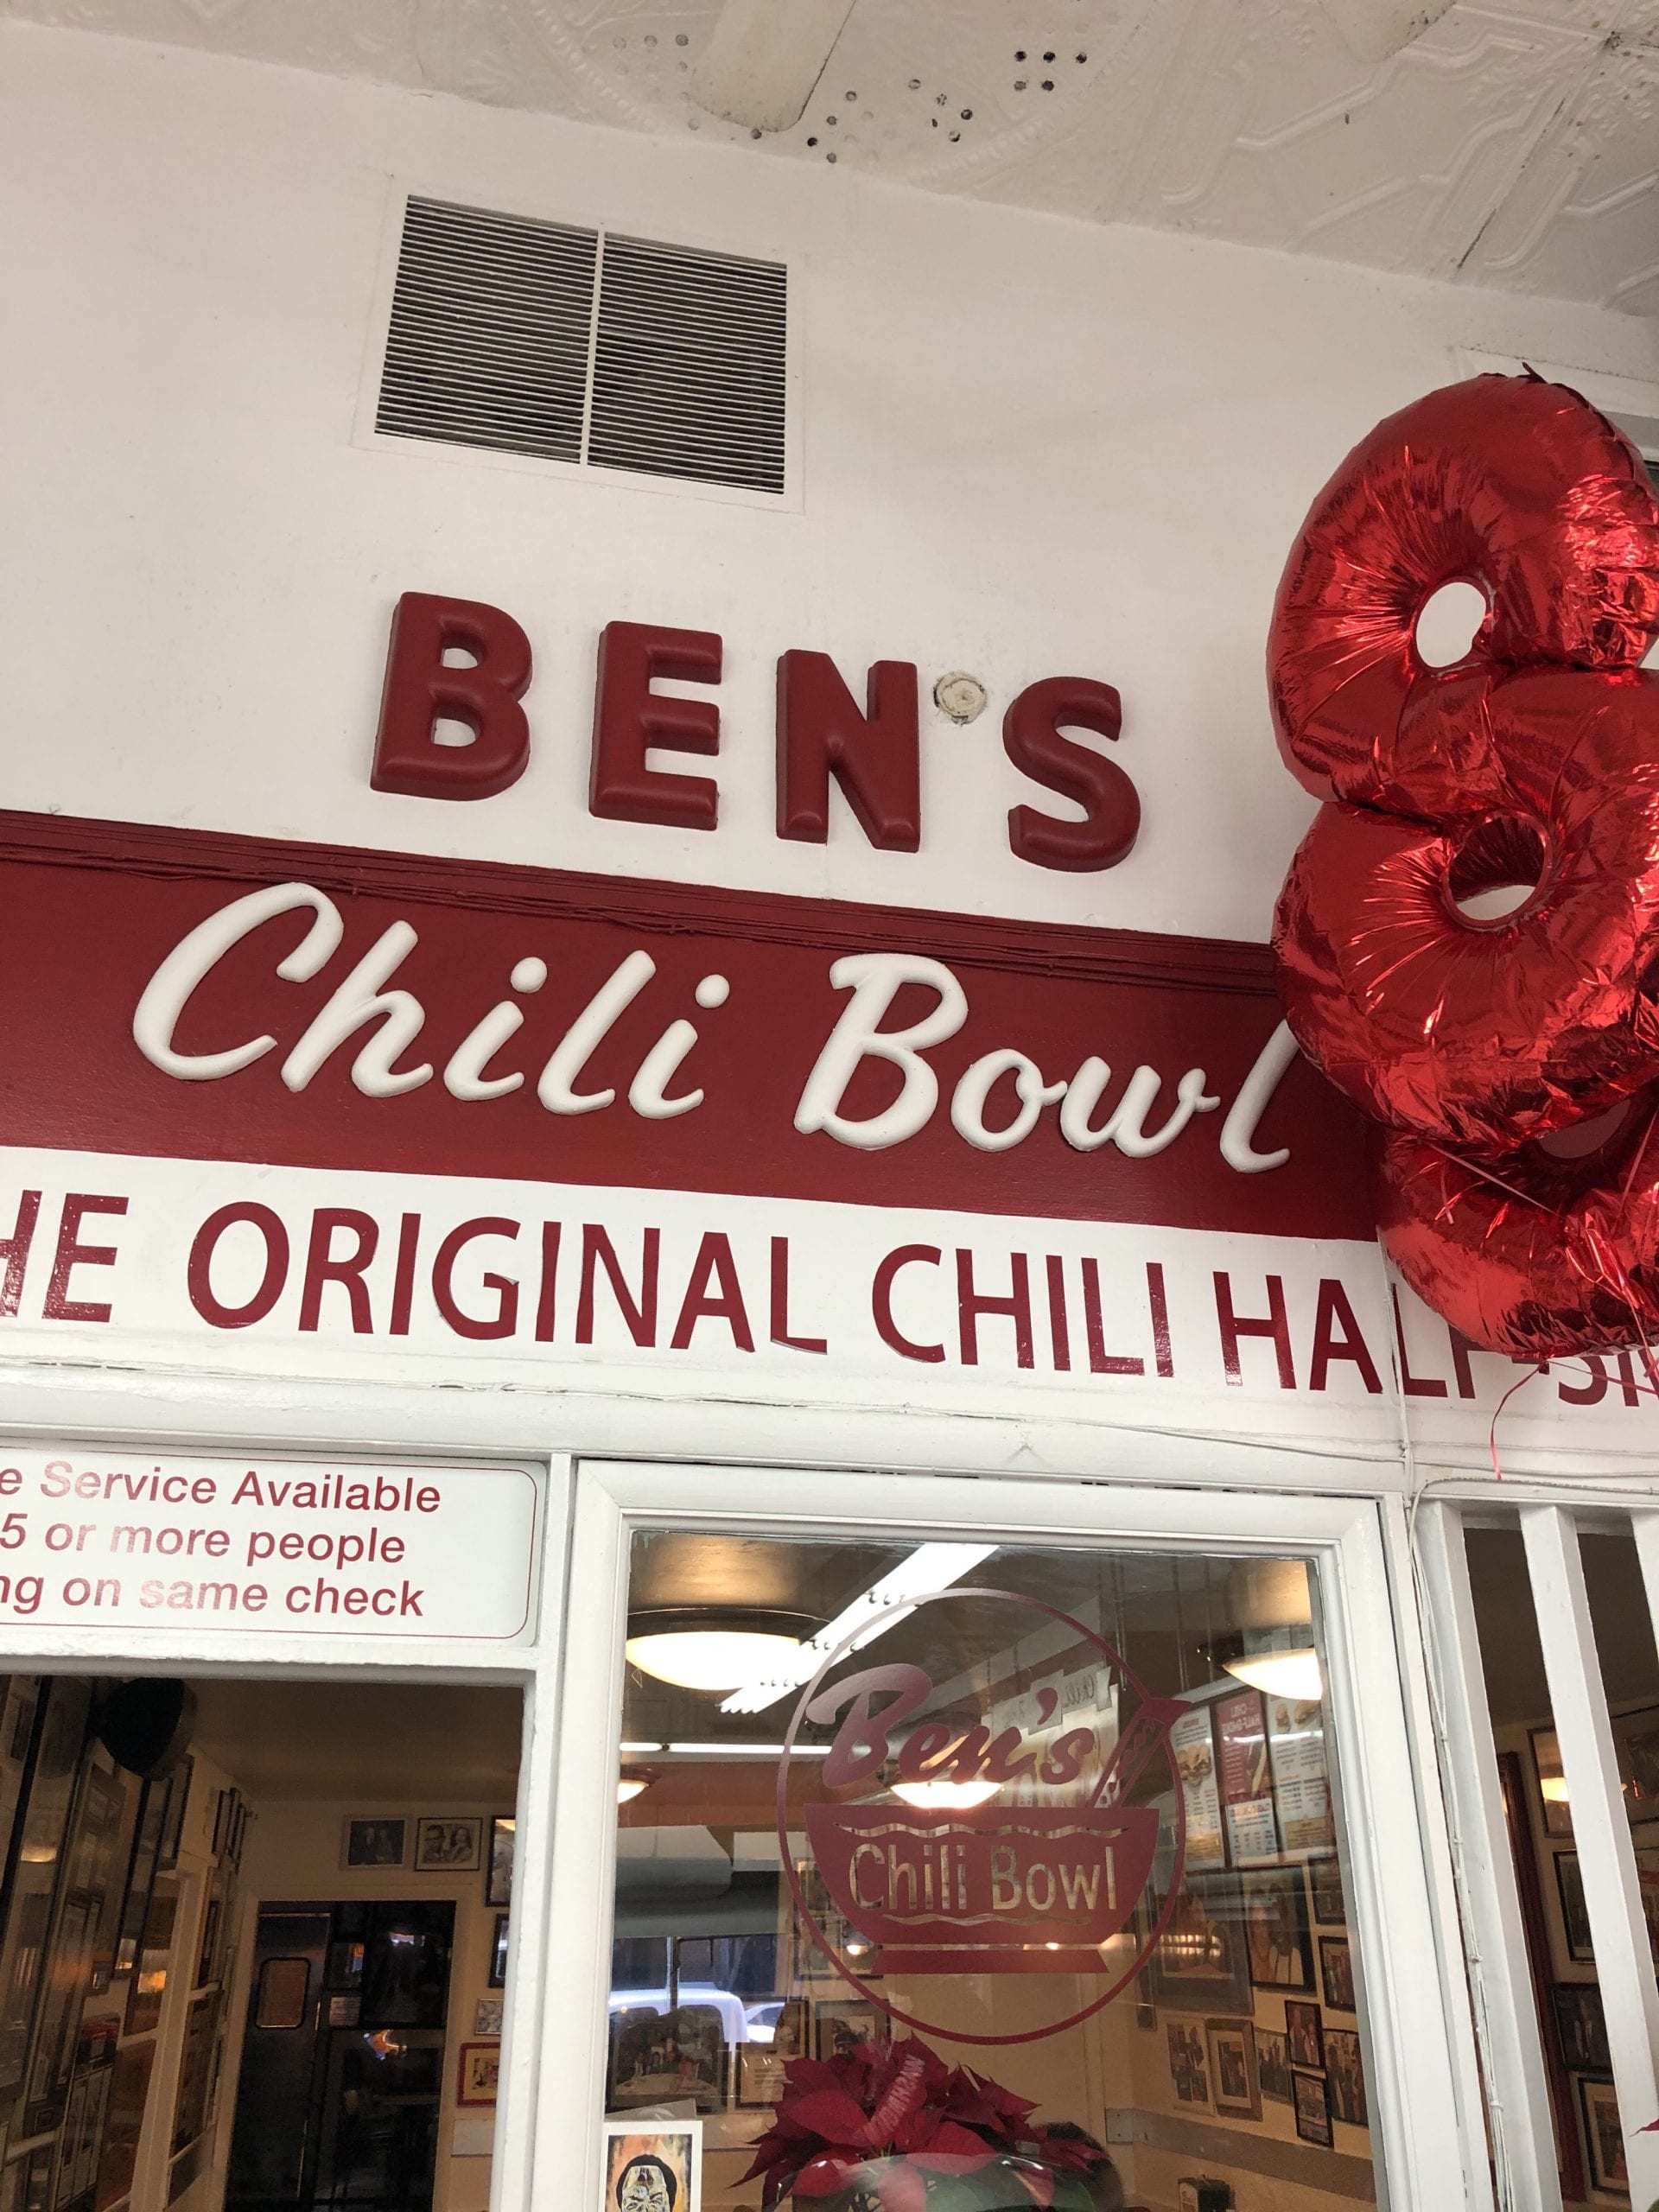 The front of a white building reading "Ben's Chili Bowl" in red on top of a glass window and door